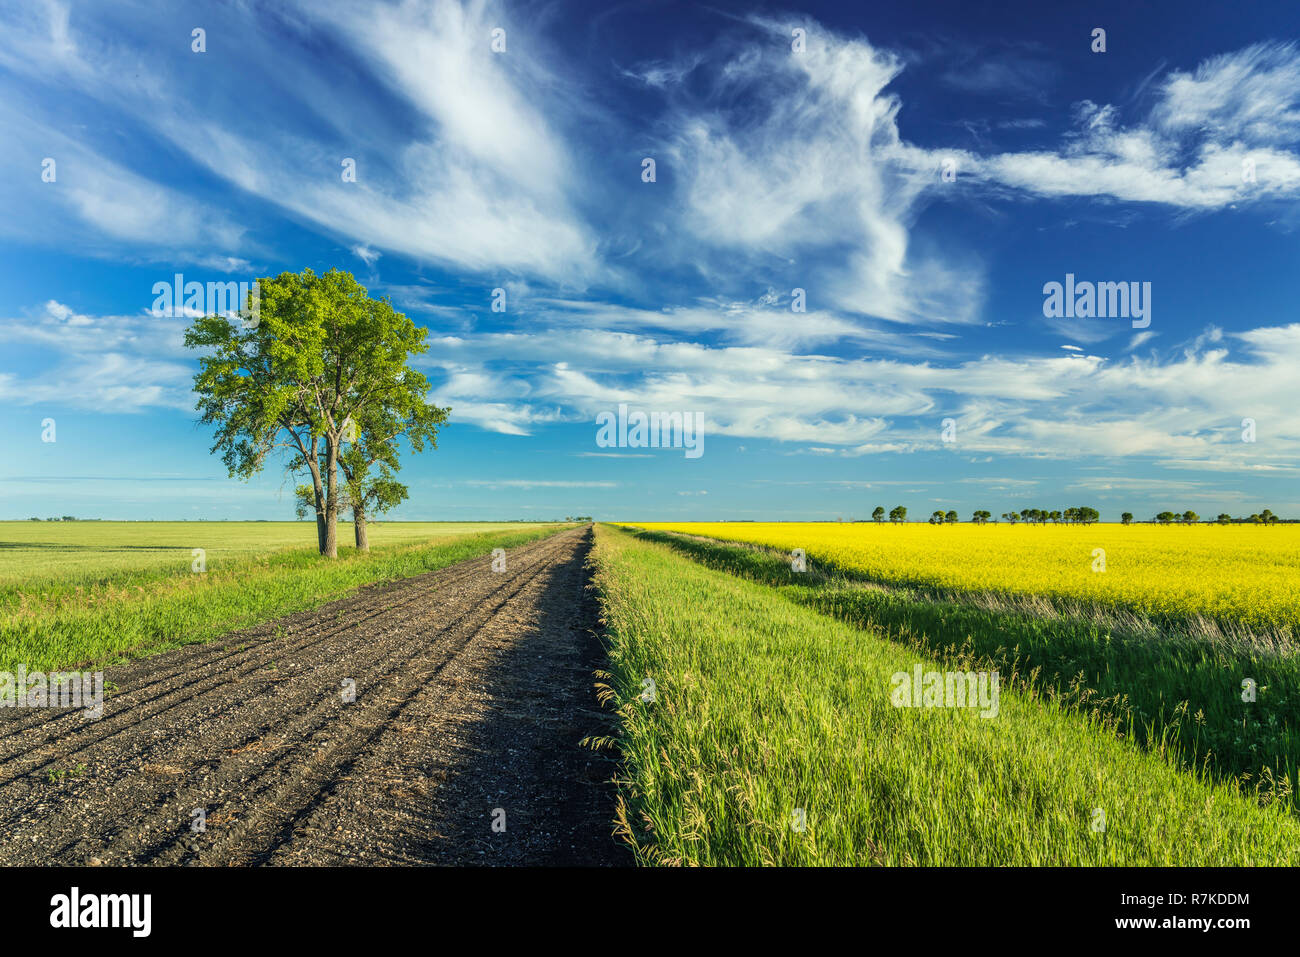 A rural road with canola and grain field near Sperling, Manitoba, Canada. Stock Photo